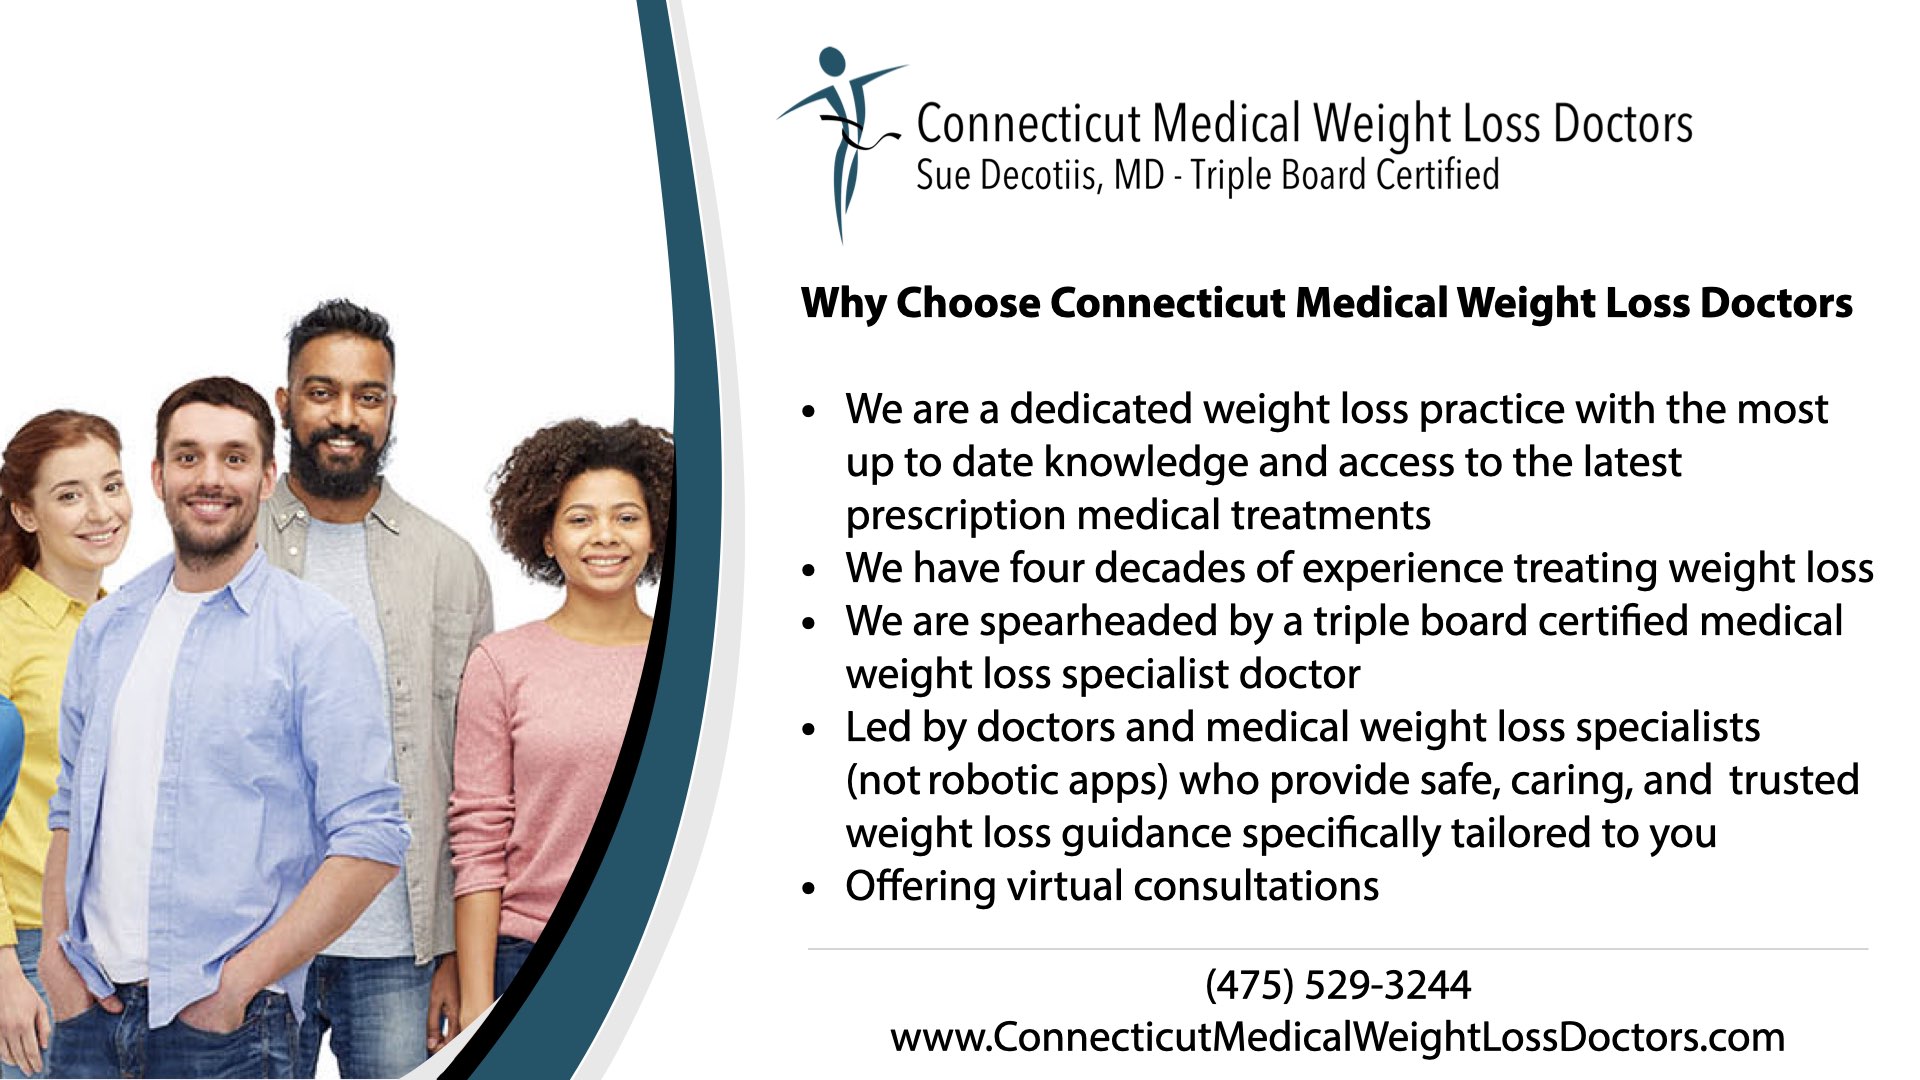 Connecticut Medical Weight Loss Doctors - Why Choose Us